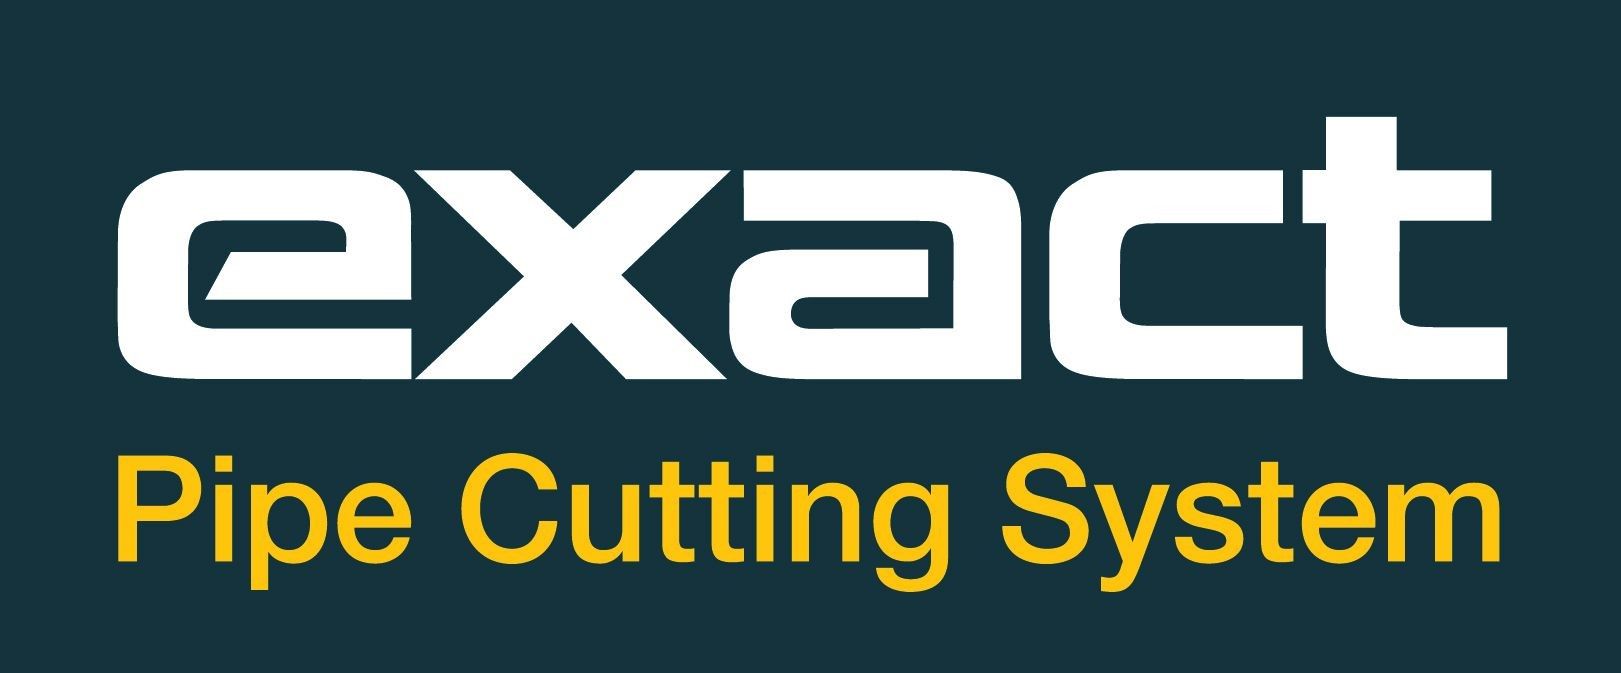 EXACT PIPE CUTTING SYSTEMS